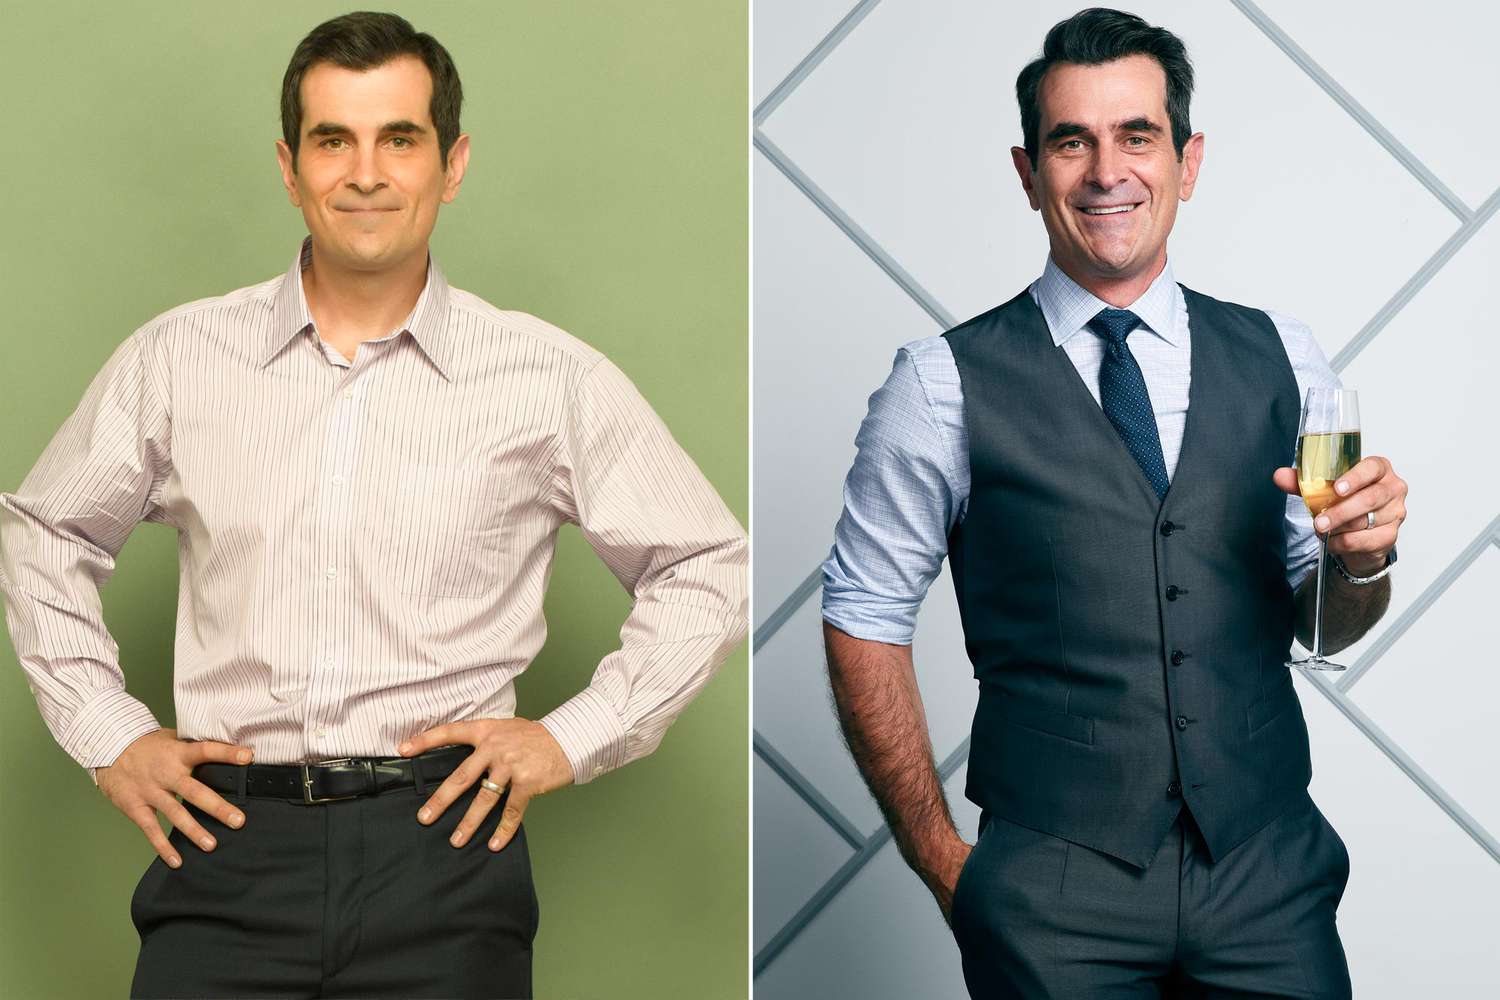 Ty Burrell as Phil Dunphy in Season 1 and Season 11